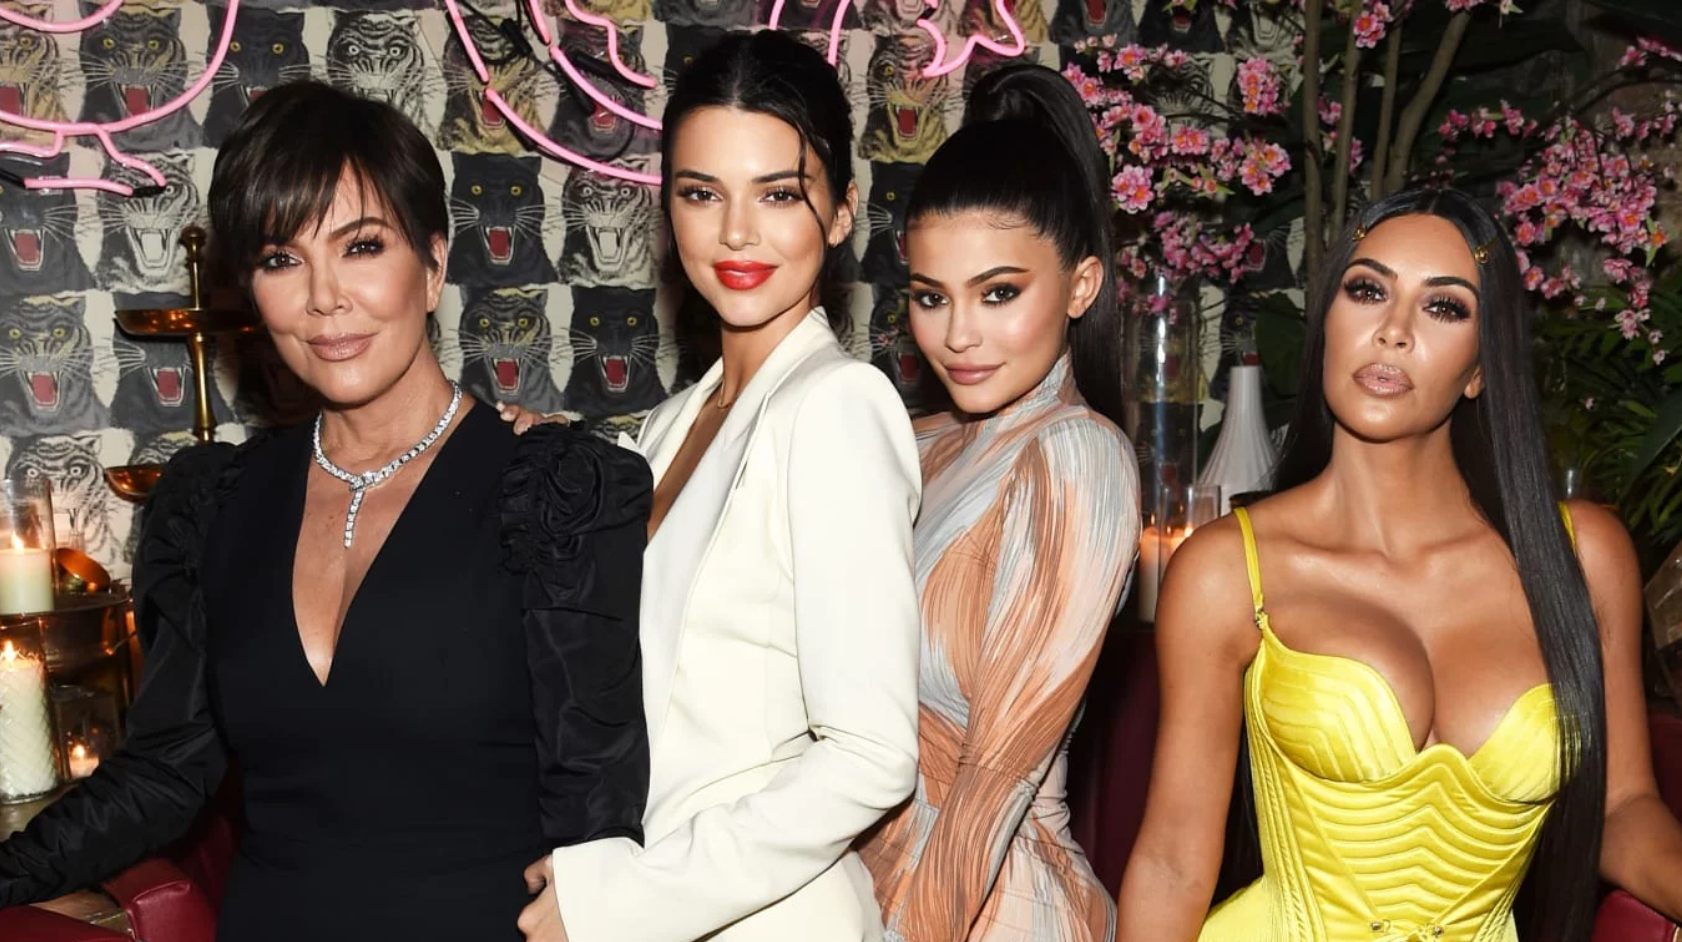 95 Things You Didn’t Know about The Kardashians